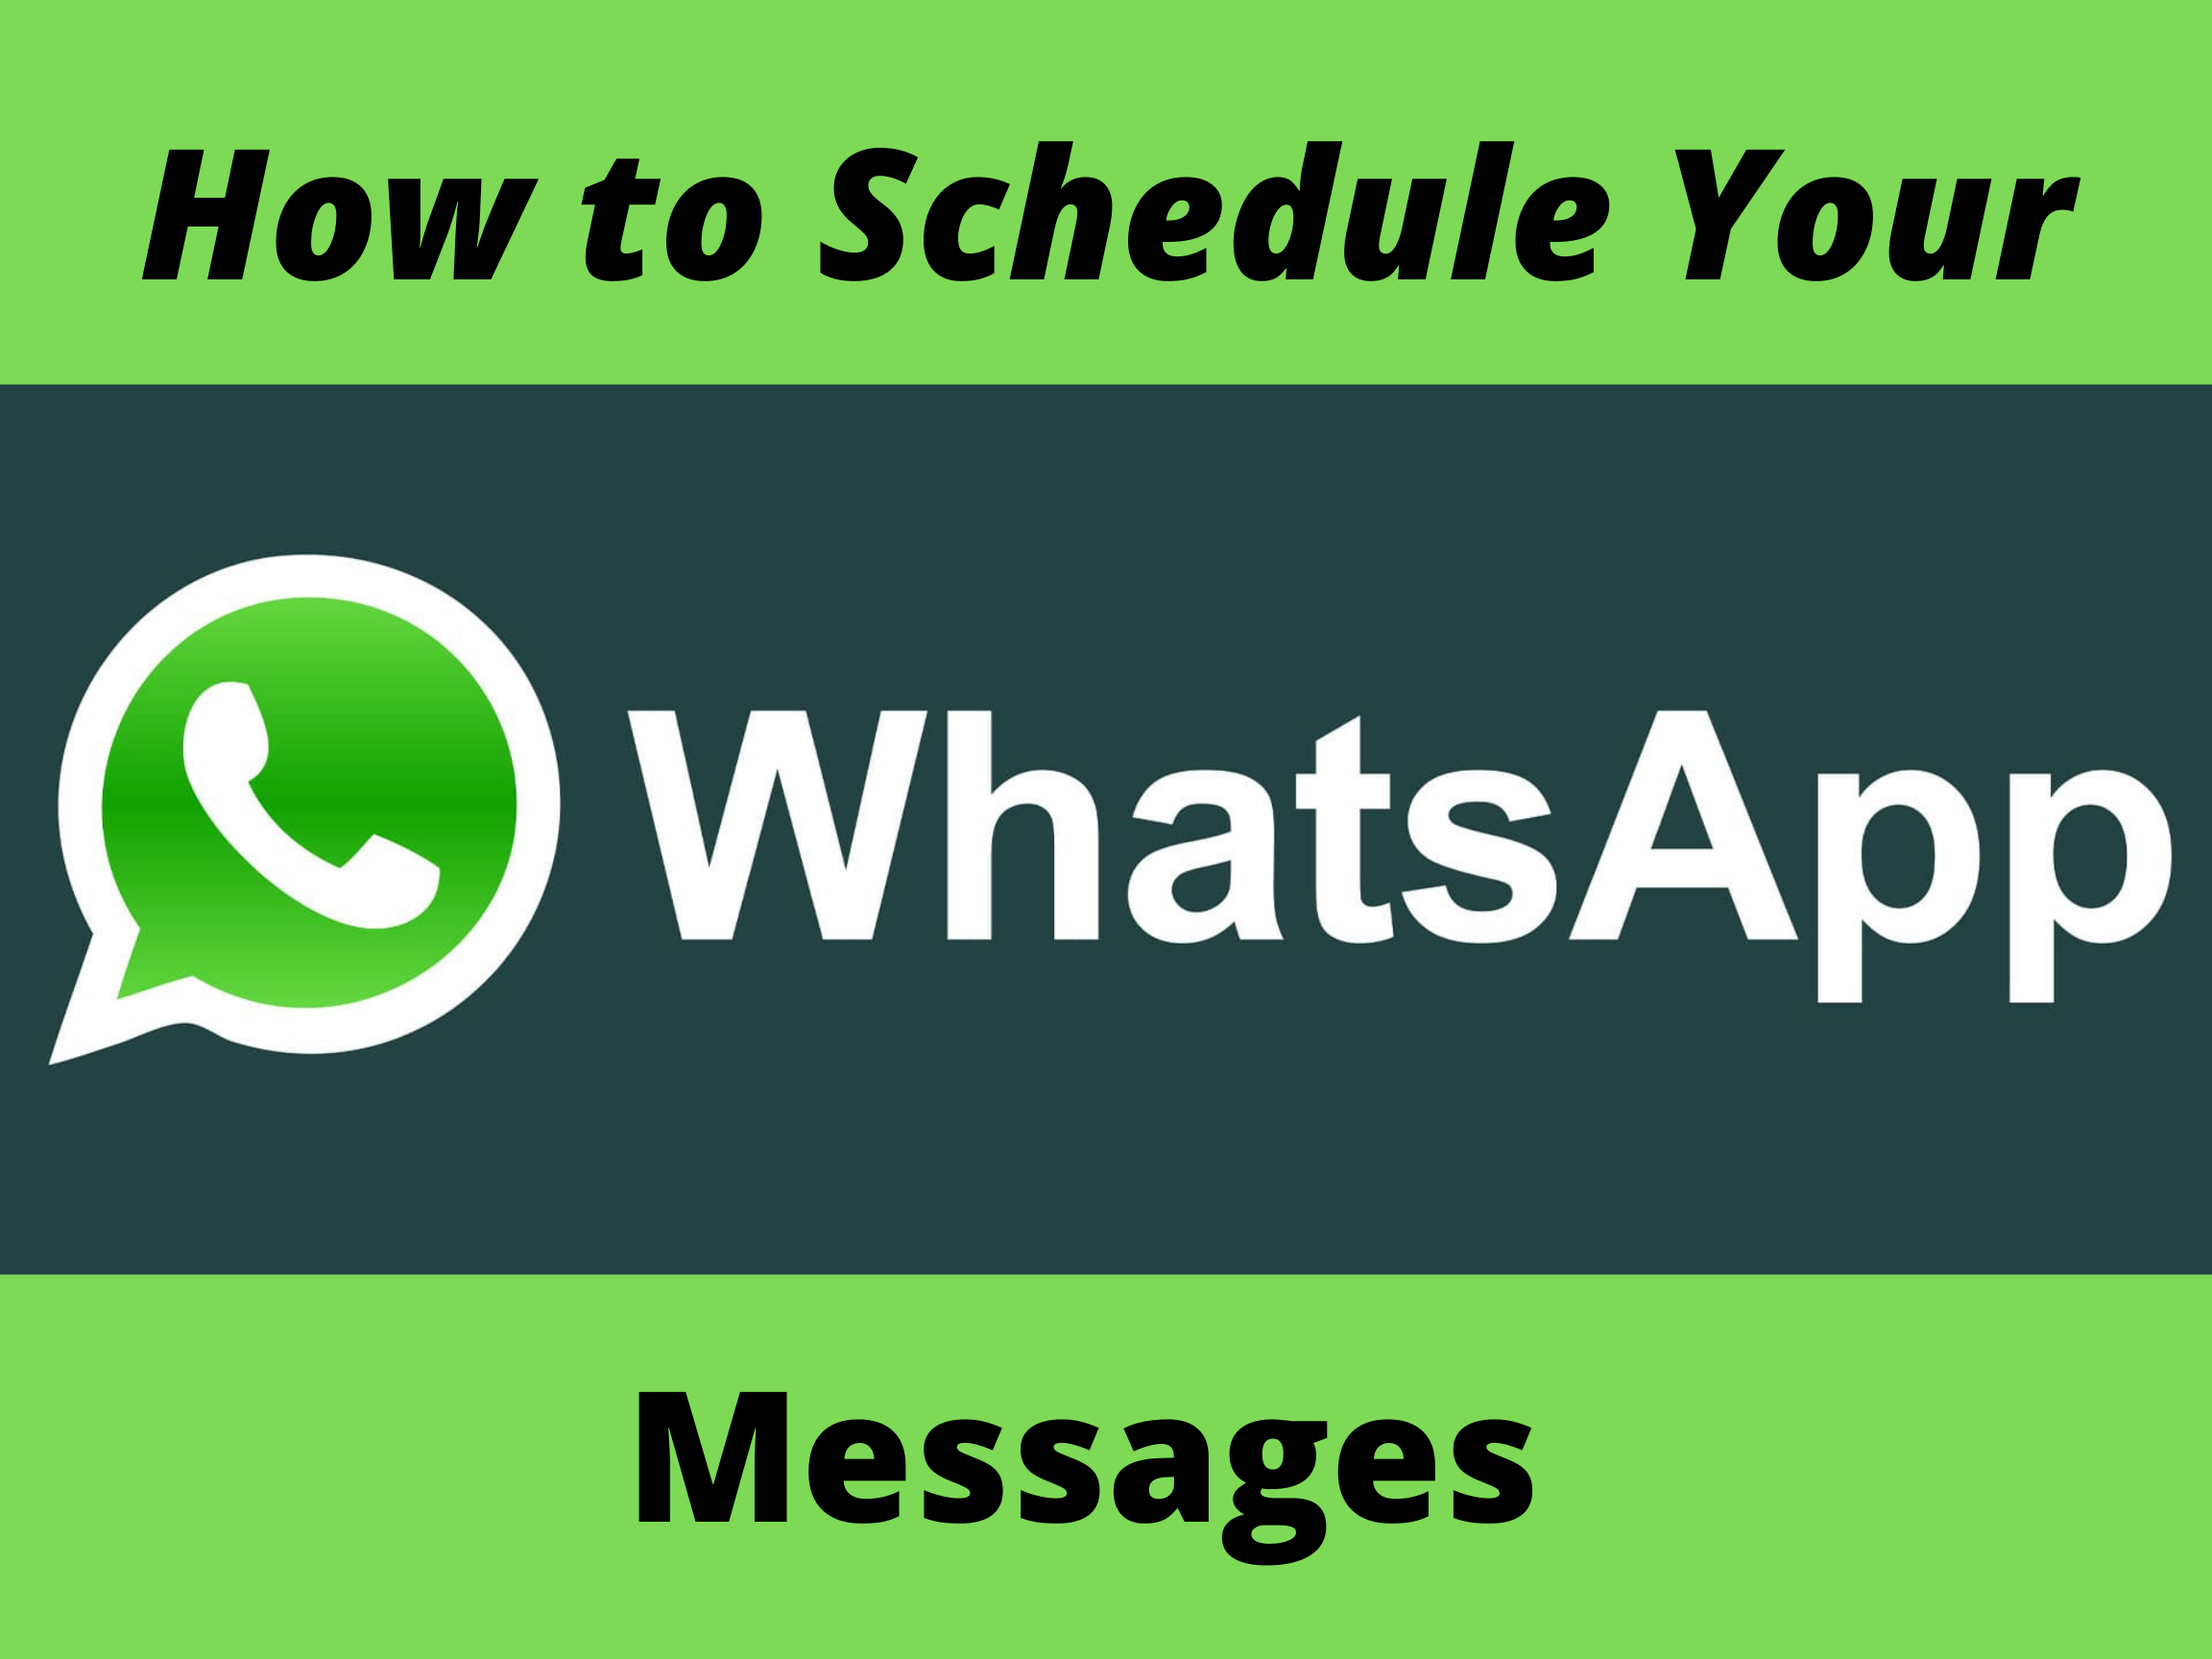 How to Schedule Your WhatsApp Messages on Android, iPhone